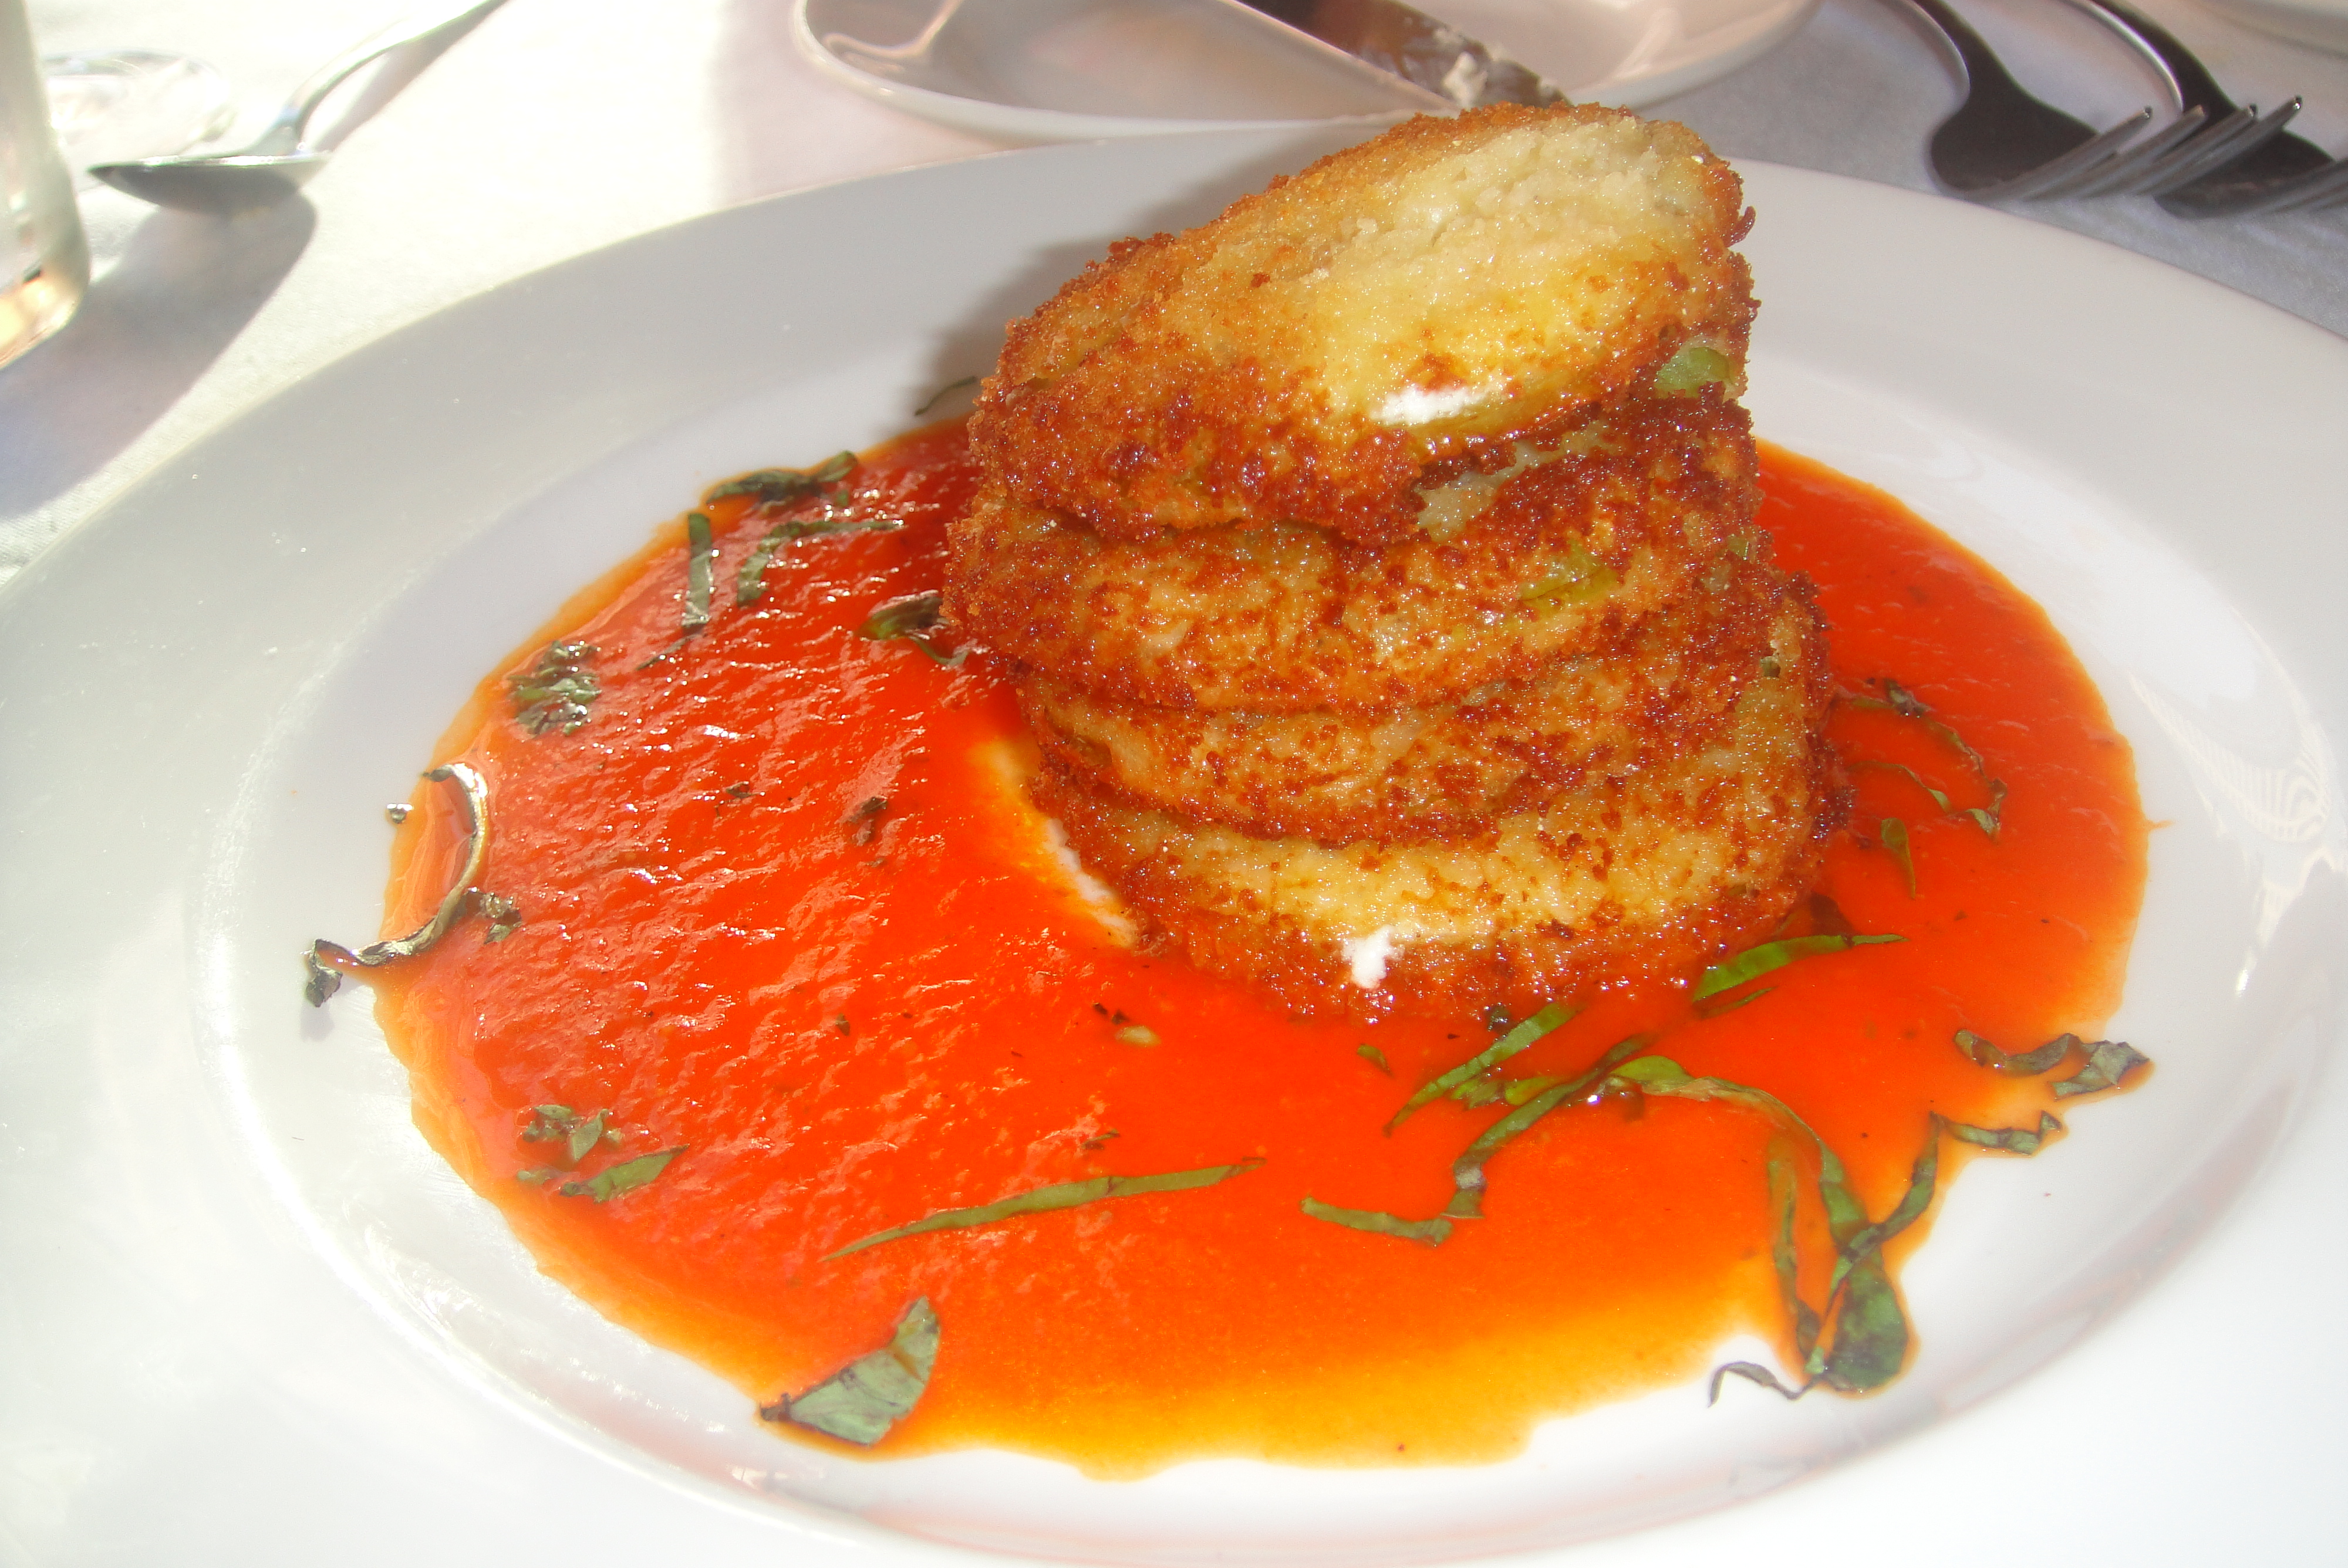 Fried Green Tomatoes With Goat Cheese And Red Pepper Coulis From